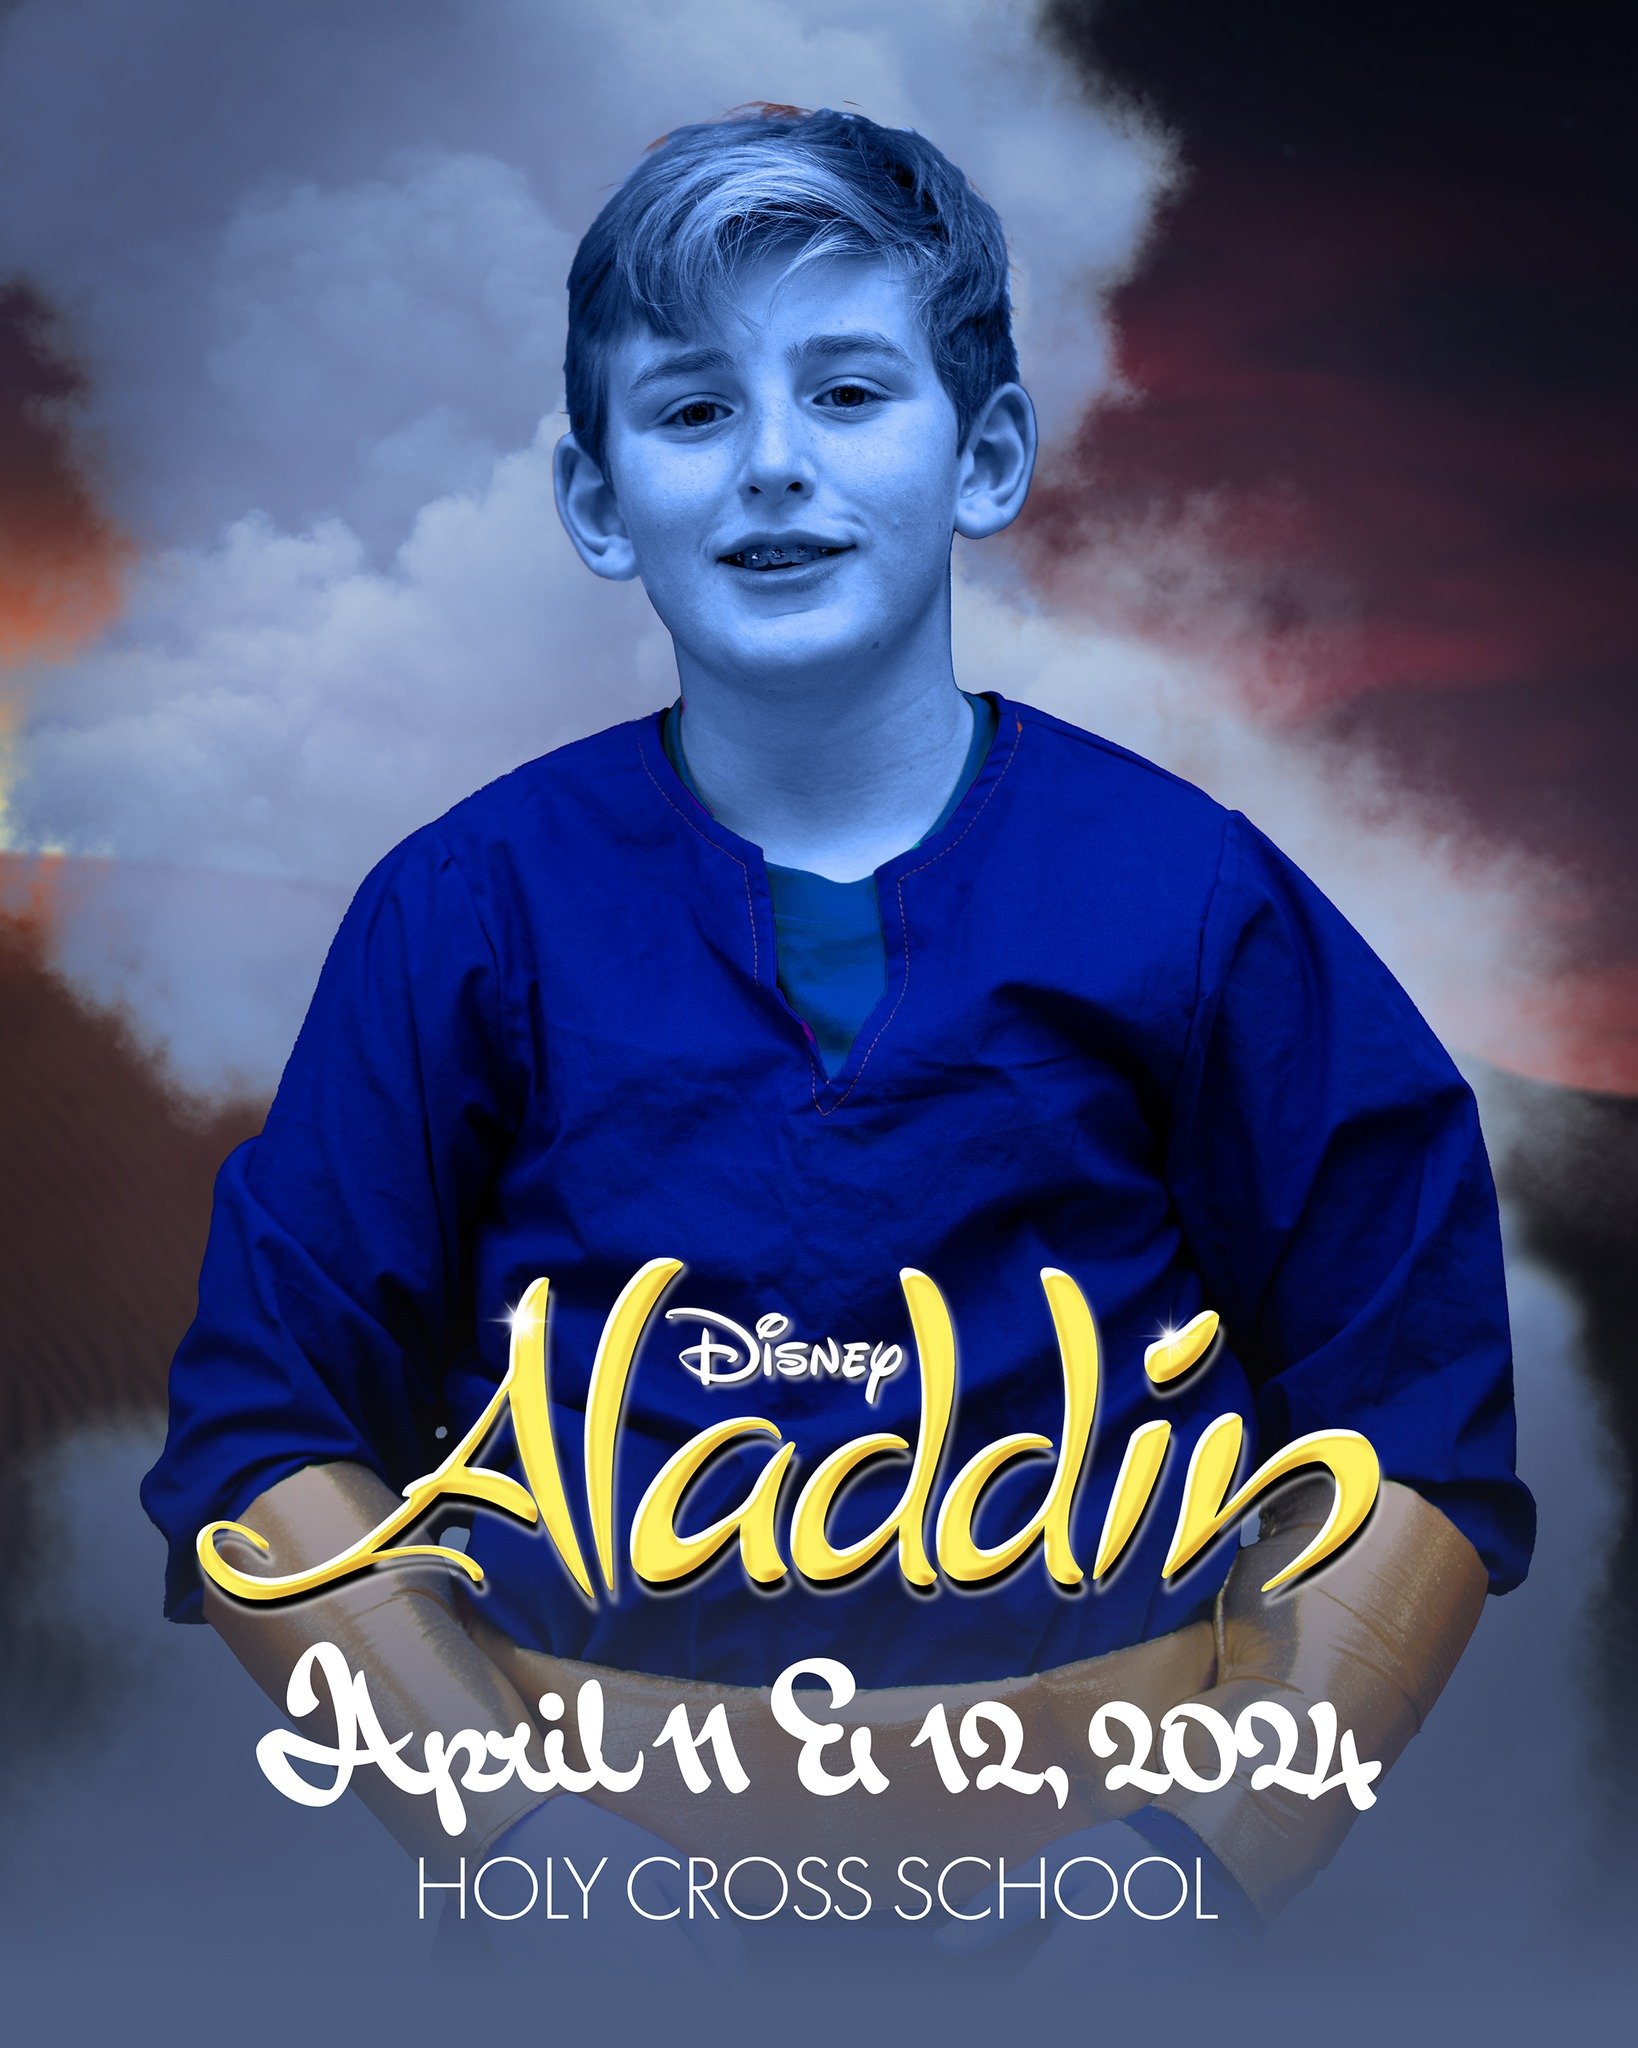 Holy Cross School is proud to present Disney's Aladdin Kids, the musical. Shows are April 11 &amp; 12 at 7:00 PM. Doors open at 6:30 PM. Tickets are $5 (cash only). Support our 6th Grade field trip by buying flowers for cast members during the show. 